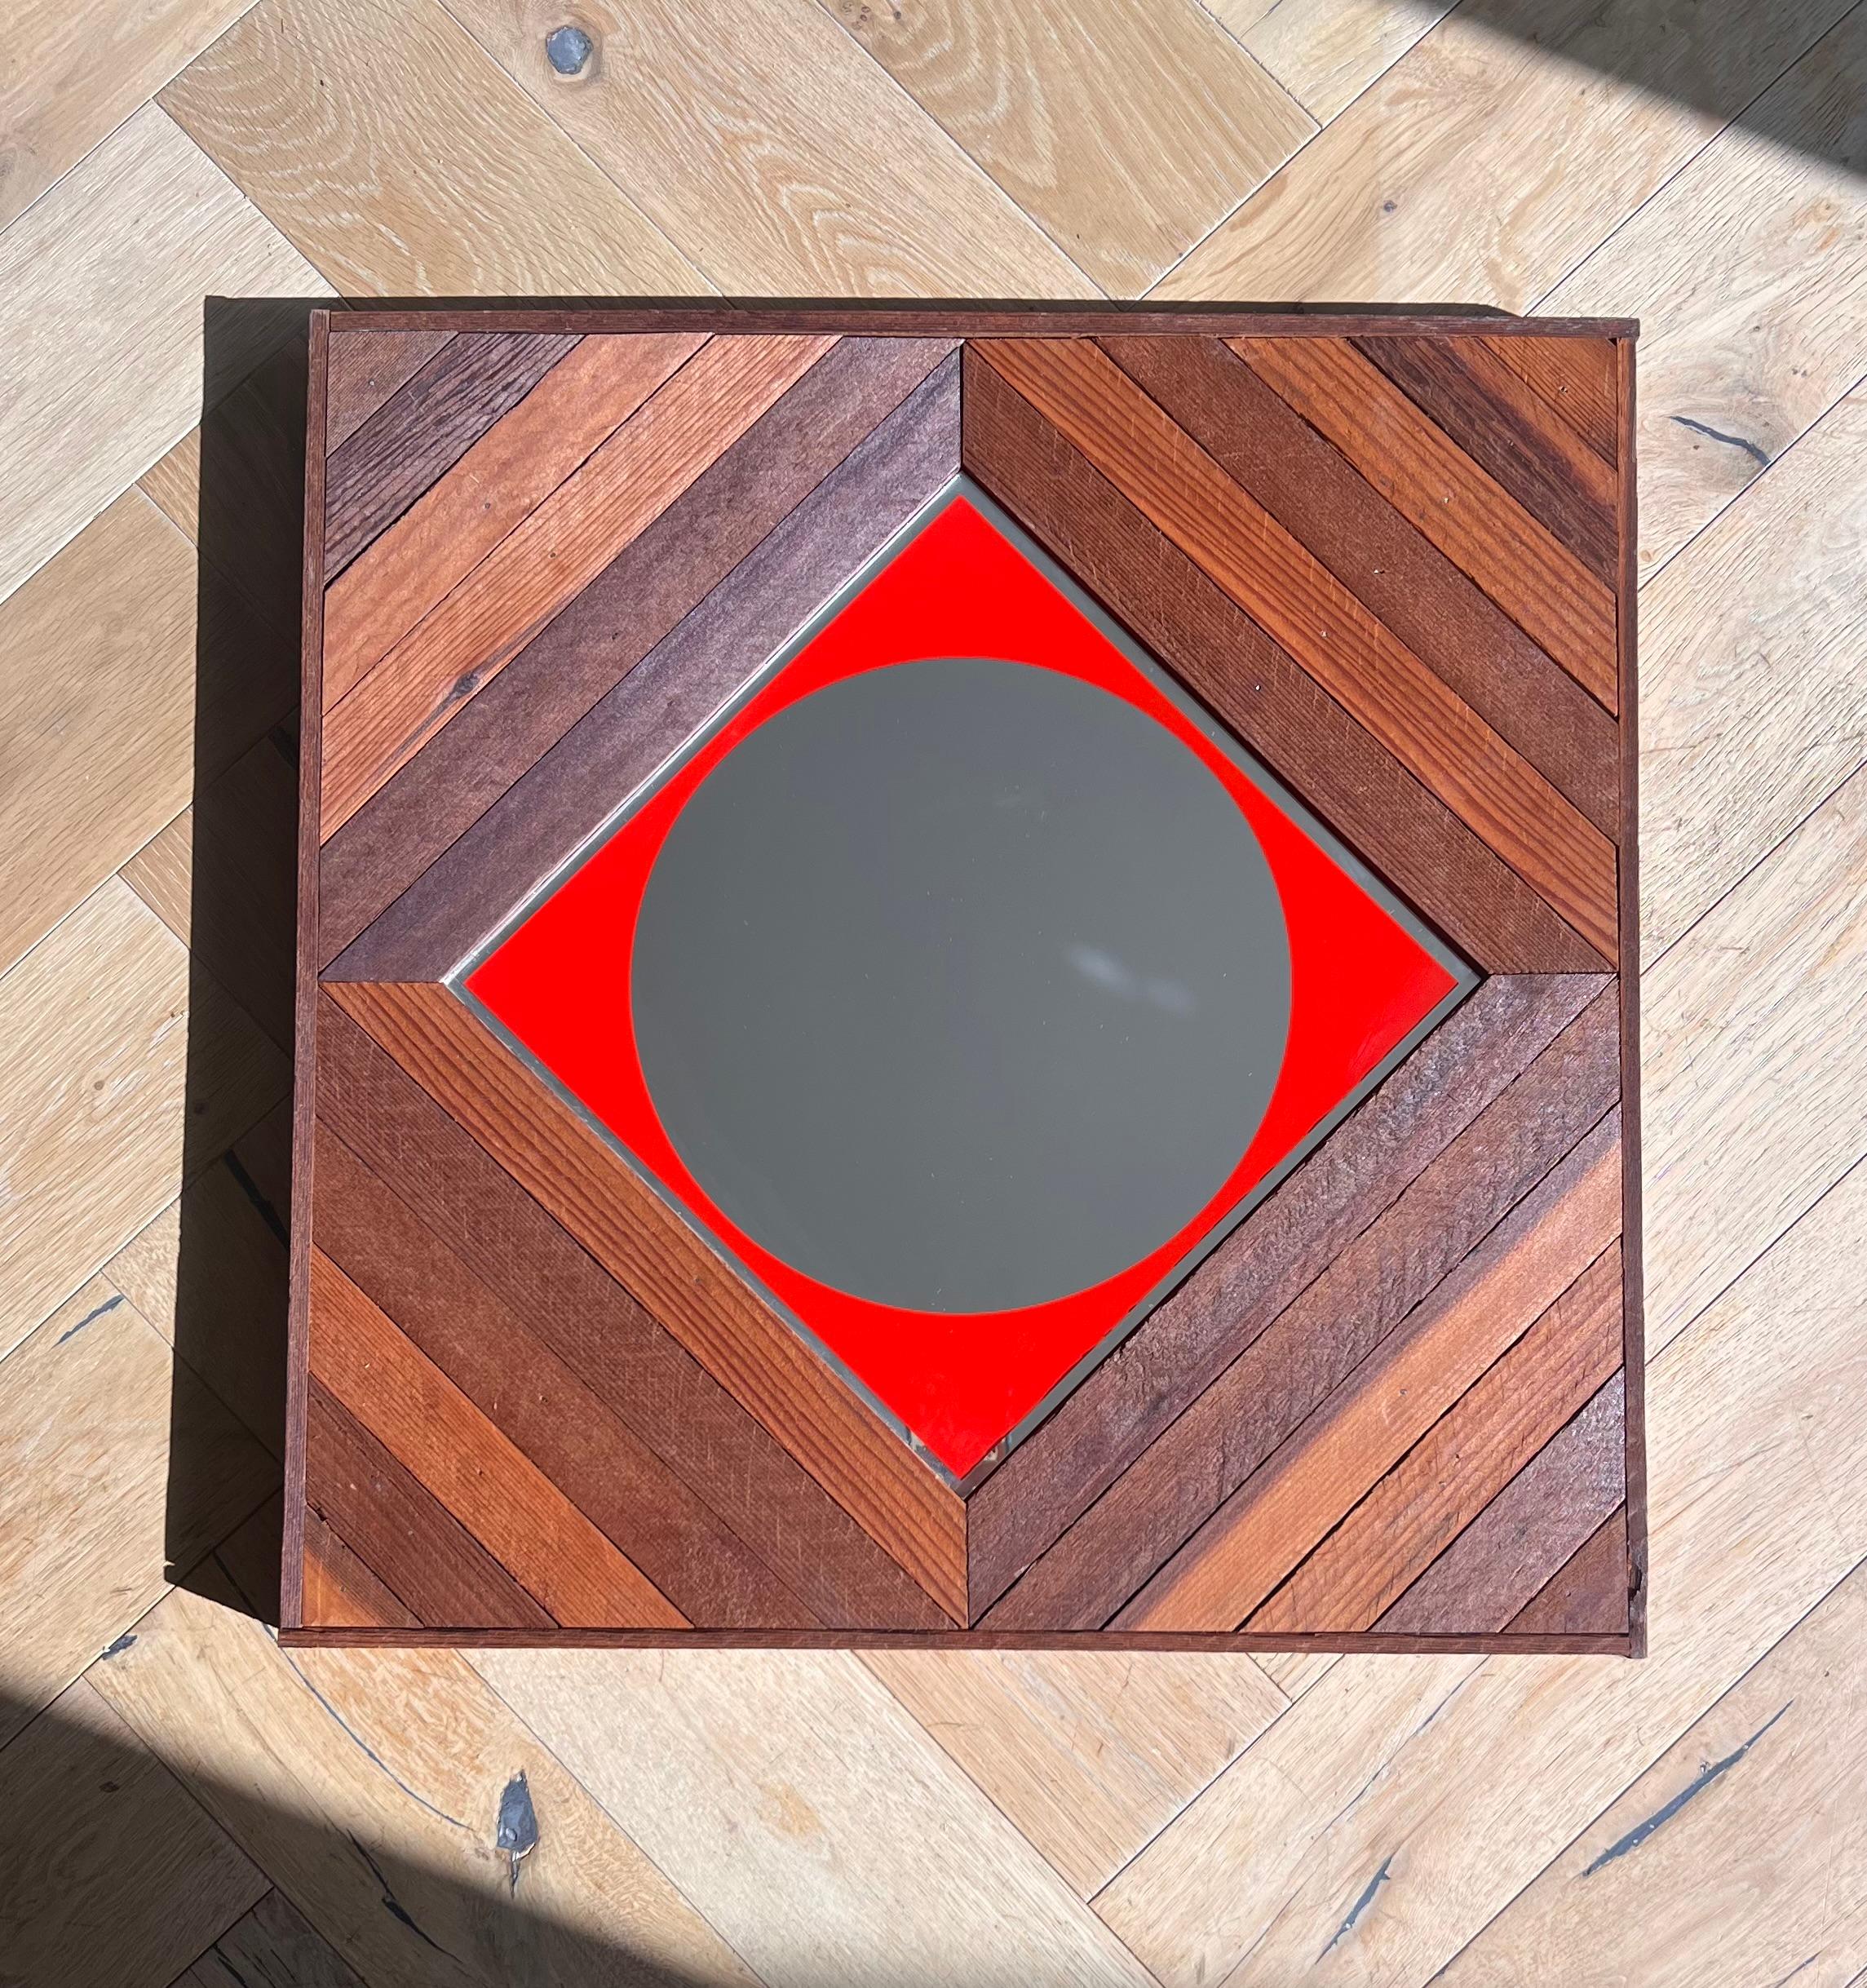 A unique mid century modern craftsman wooden mirror with red square accent, circa early 1960s. Signs of age are minor and include slight scuffs to wood. Ready to hang. Pick up in central west Los Angeles or we ship worldwide.